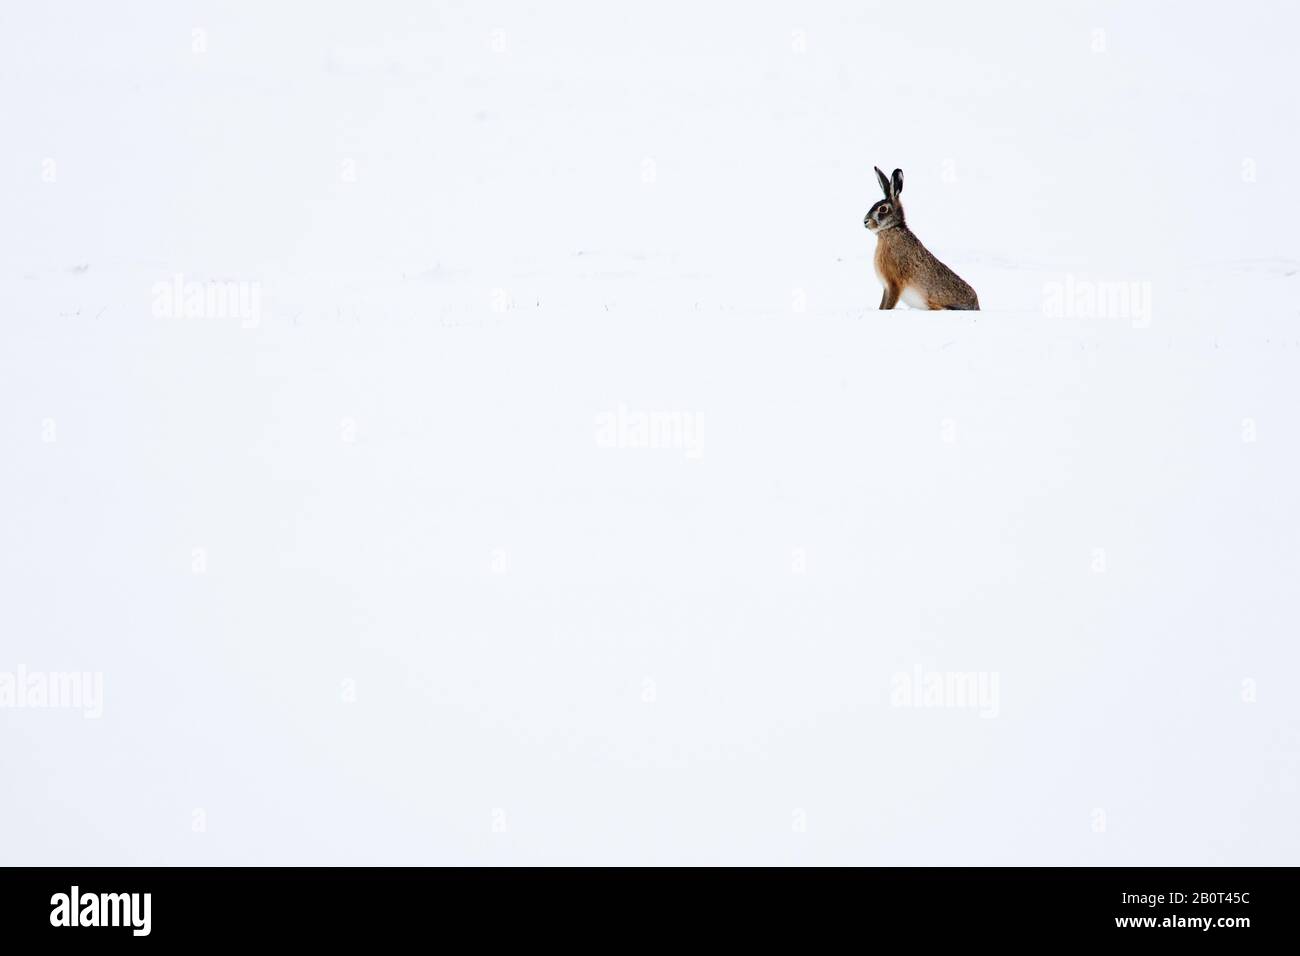 European hare, Brown hare (Lepus europaeus), sit in snowy landscape, Netherlands Stock Photo